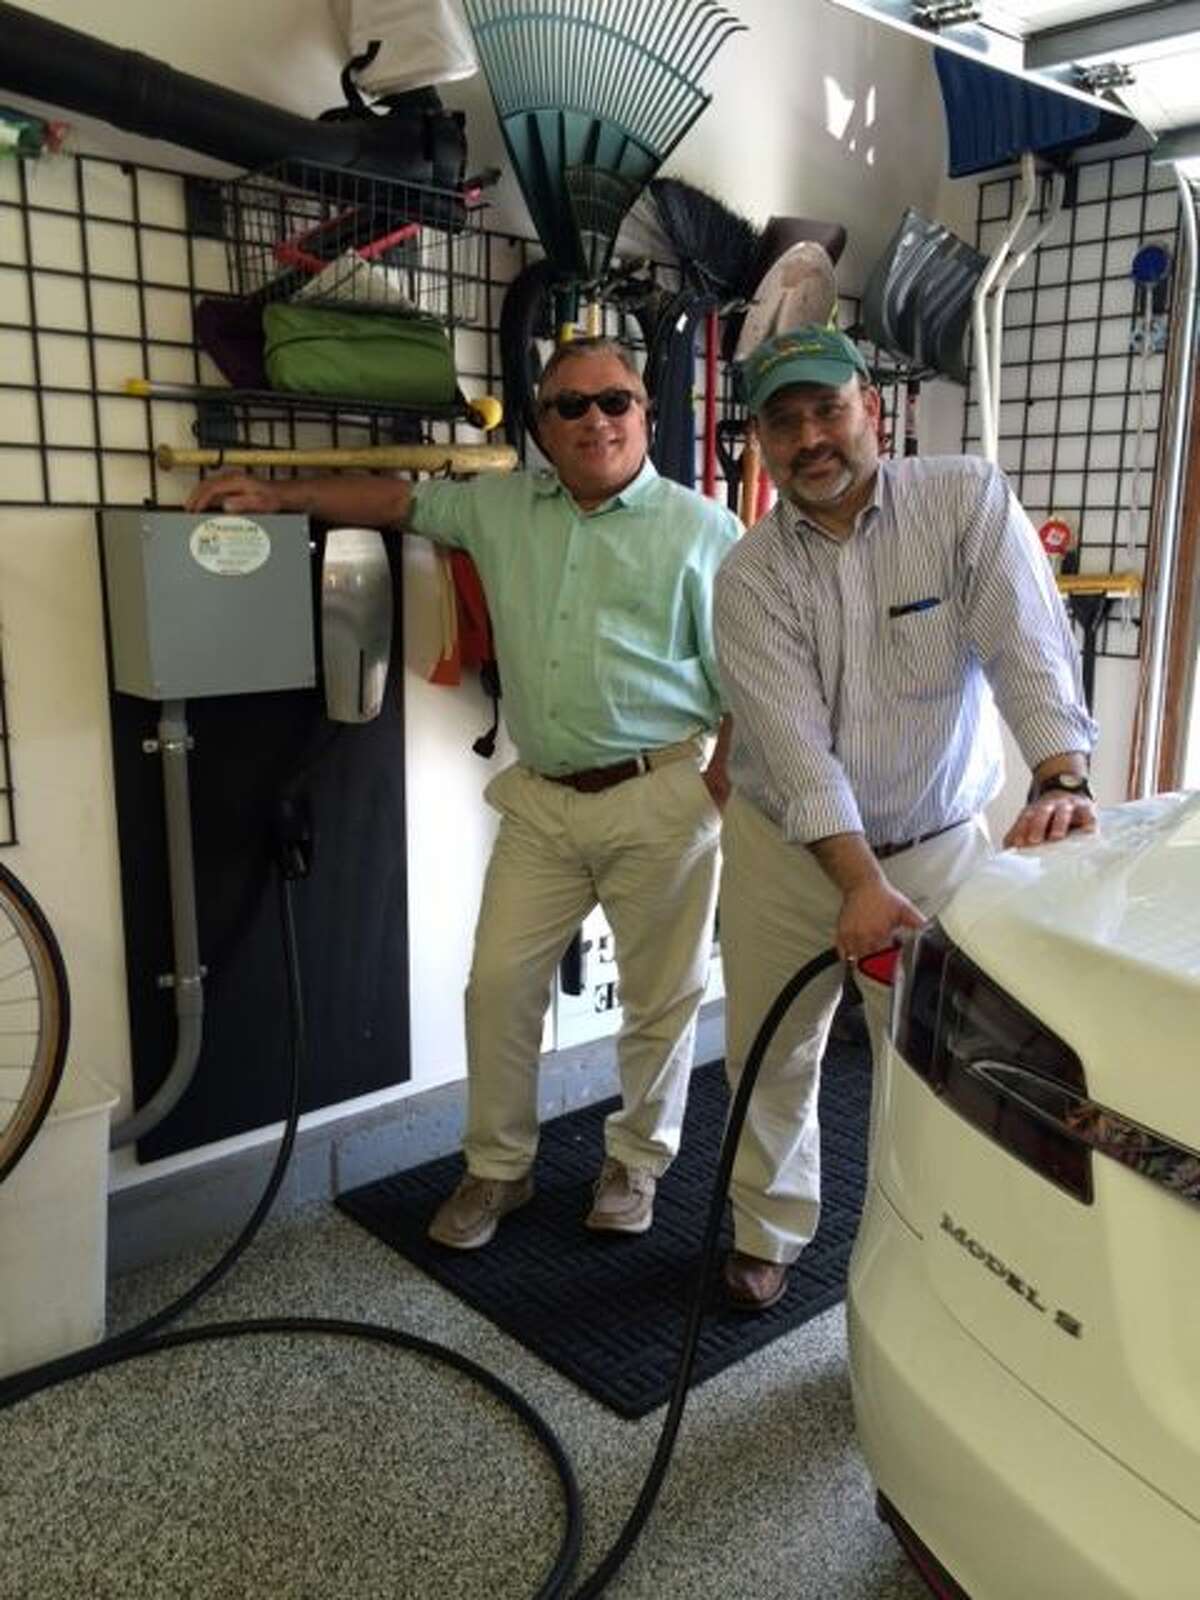 Photo: Ed Ingalls, owner of CT Electric Car, a division of Newington Electric, visits with Tesla electric vehicle owner Seth Diamond after the installation of a car charging station at his Glastonbury, CT home. CT Electric Car has been selected as one of Tesla's recommended car charging station installers.   